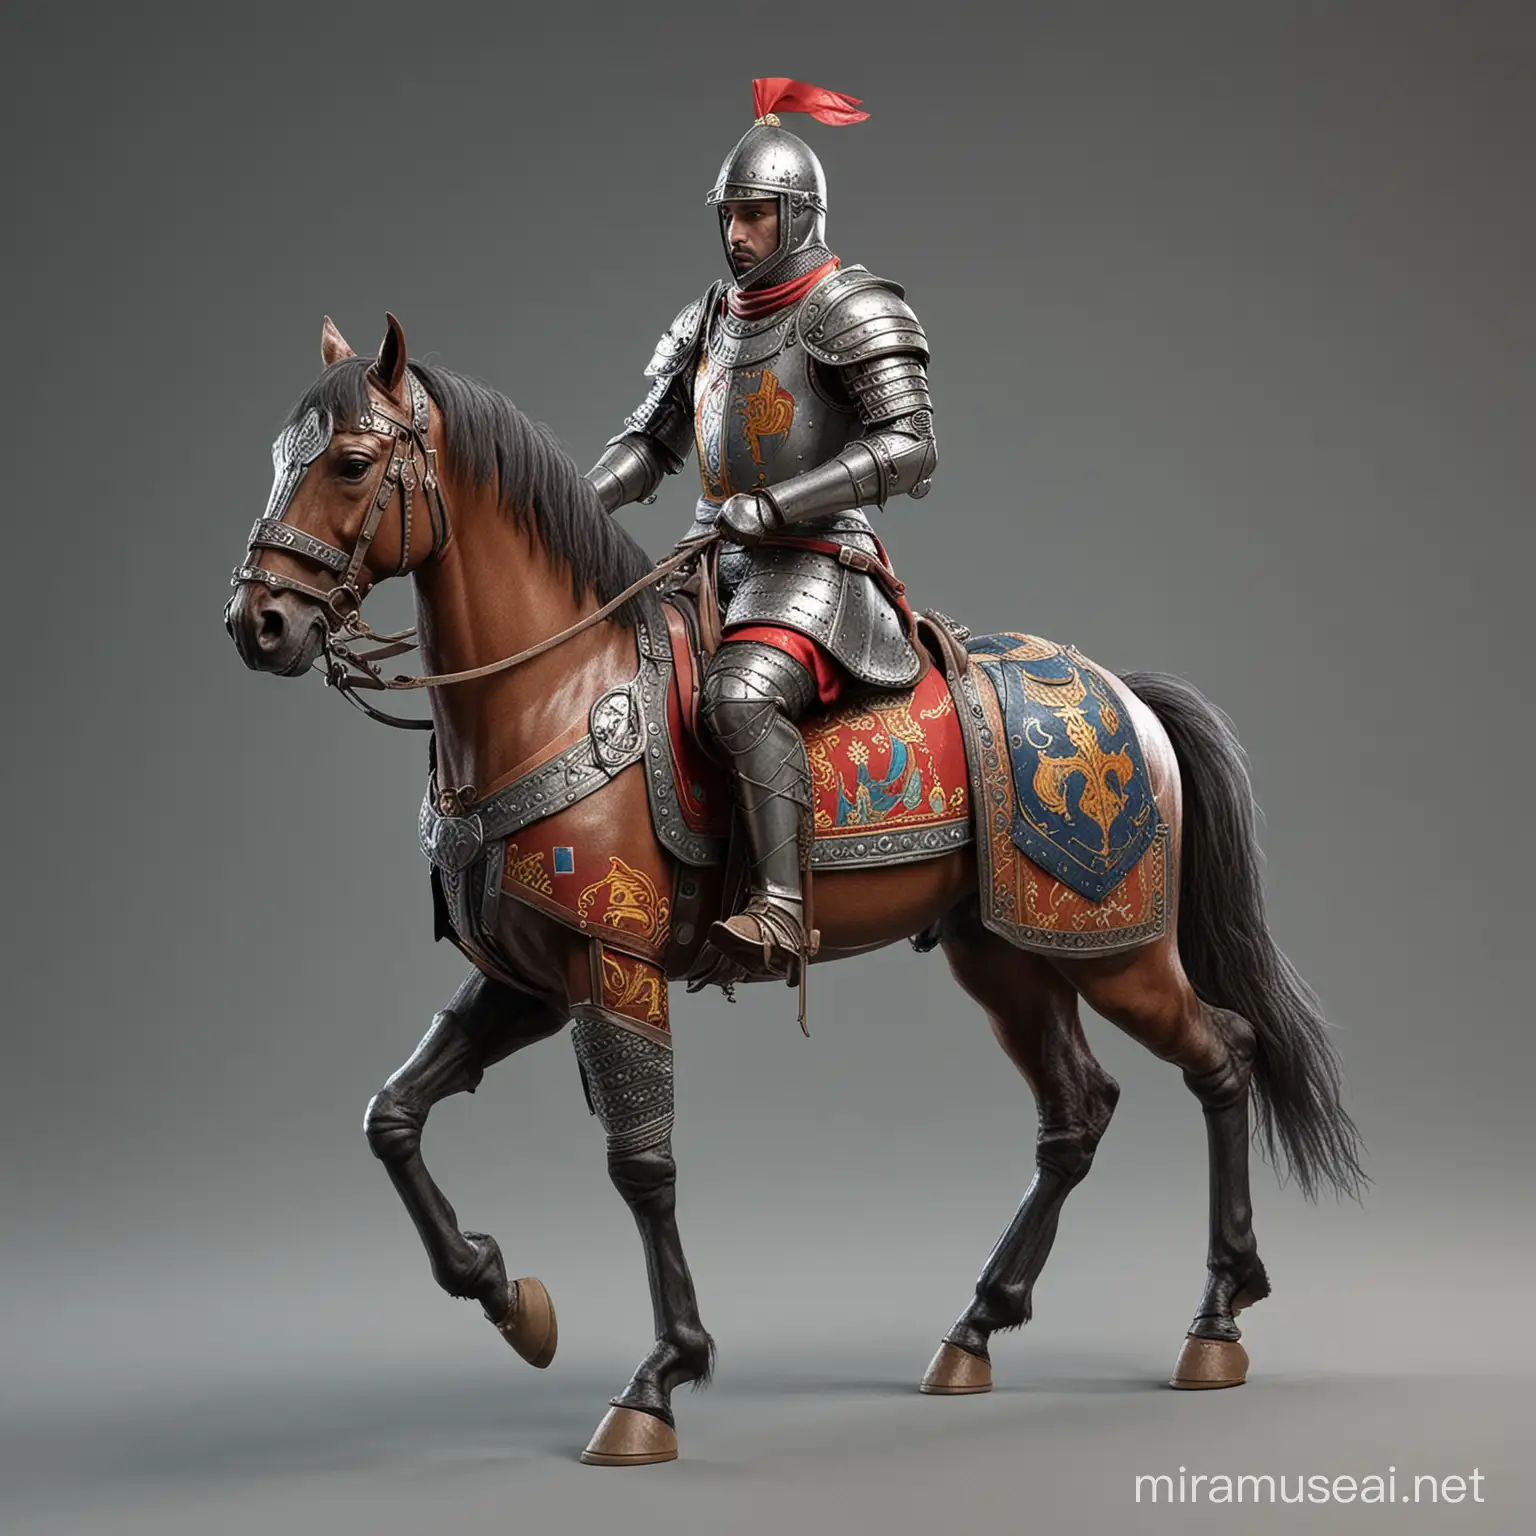 Eastern Knight Riding Horse in Battle